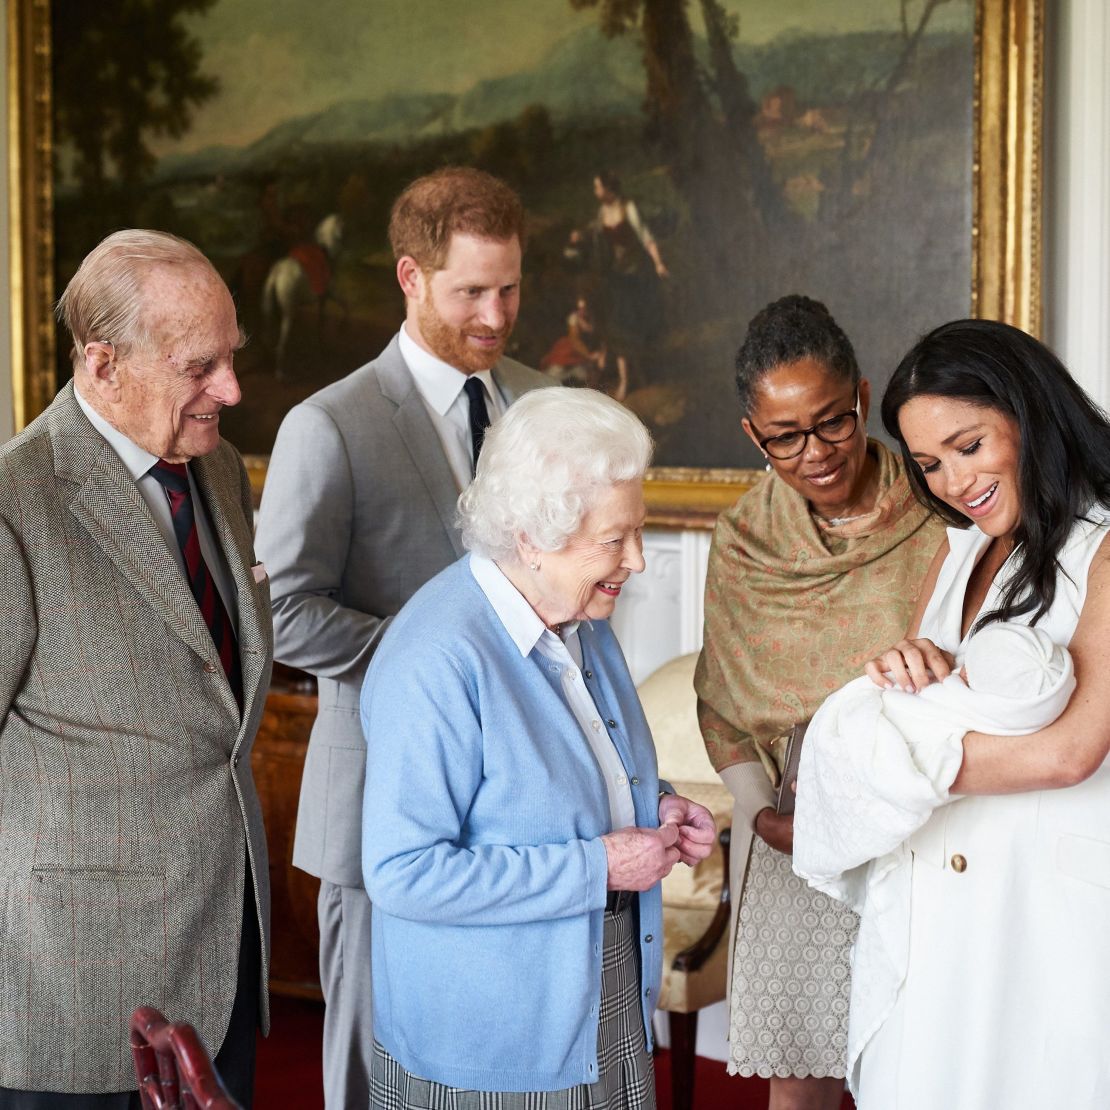 Prince Harry and wife Meghan show their new son Archie Harrison Mountbatten-Windsor to Meghan's mother Doria Ragland, Queen Elizabeth II and Prince Philip, in May last year.